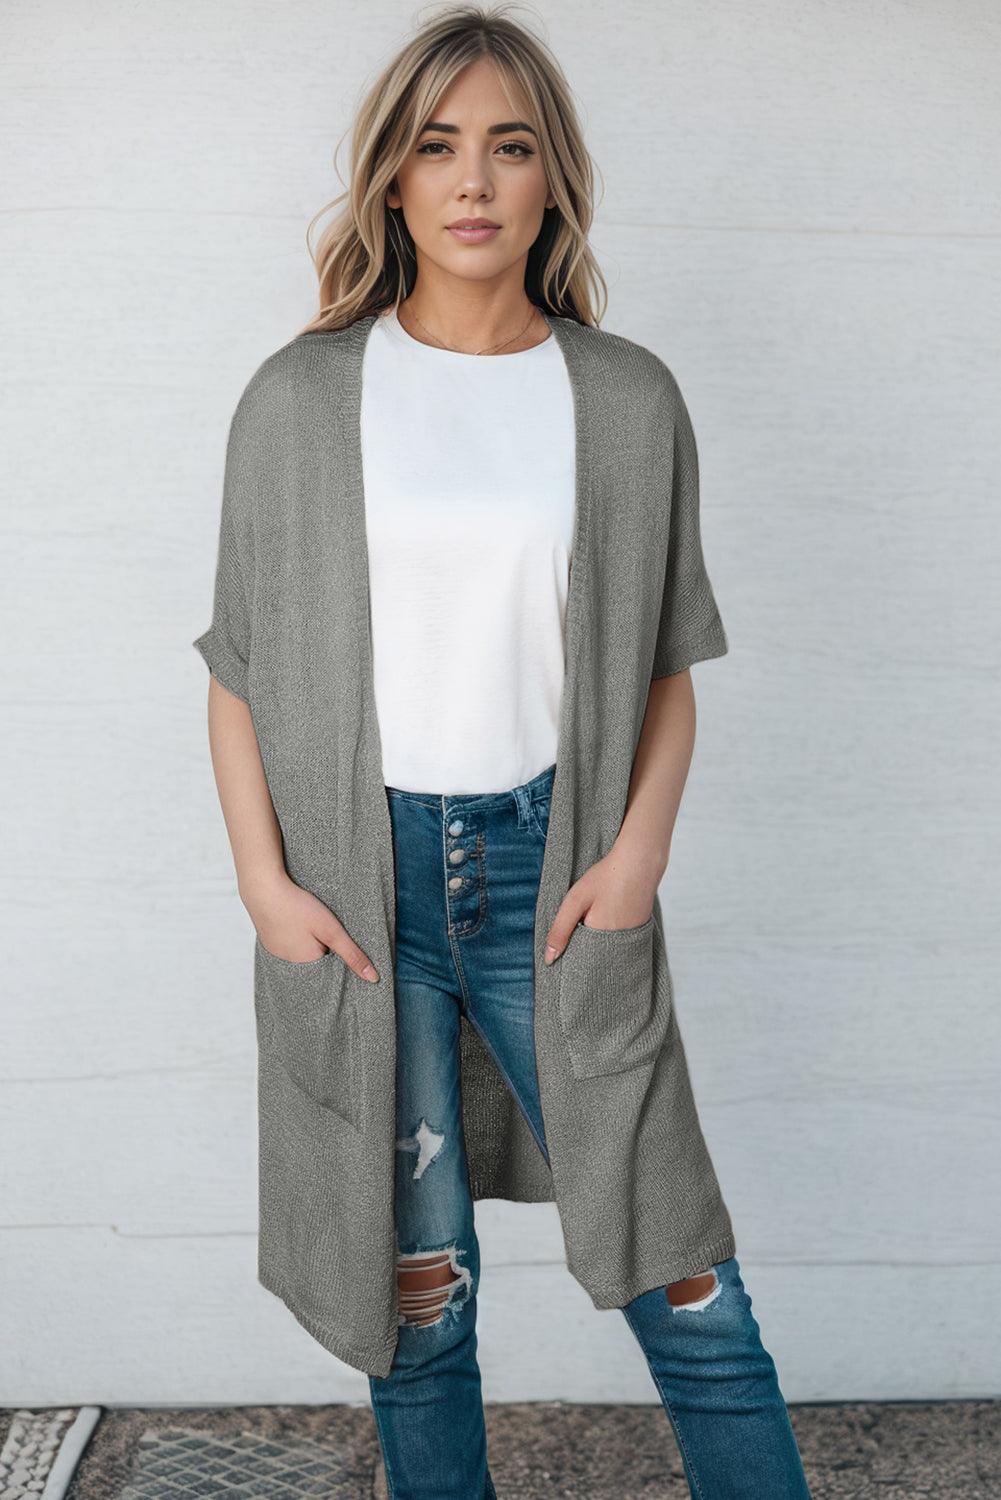 Long Open Front Sweater Cardigan with Pockets - Cardigan